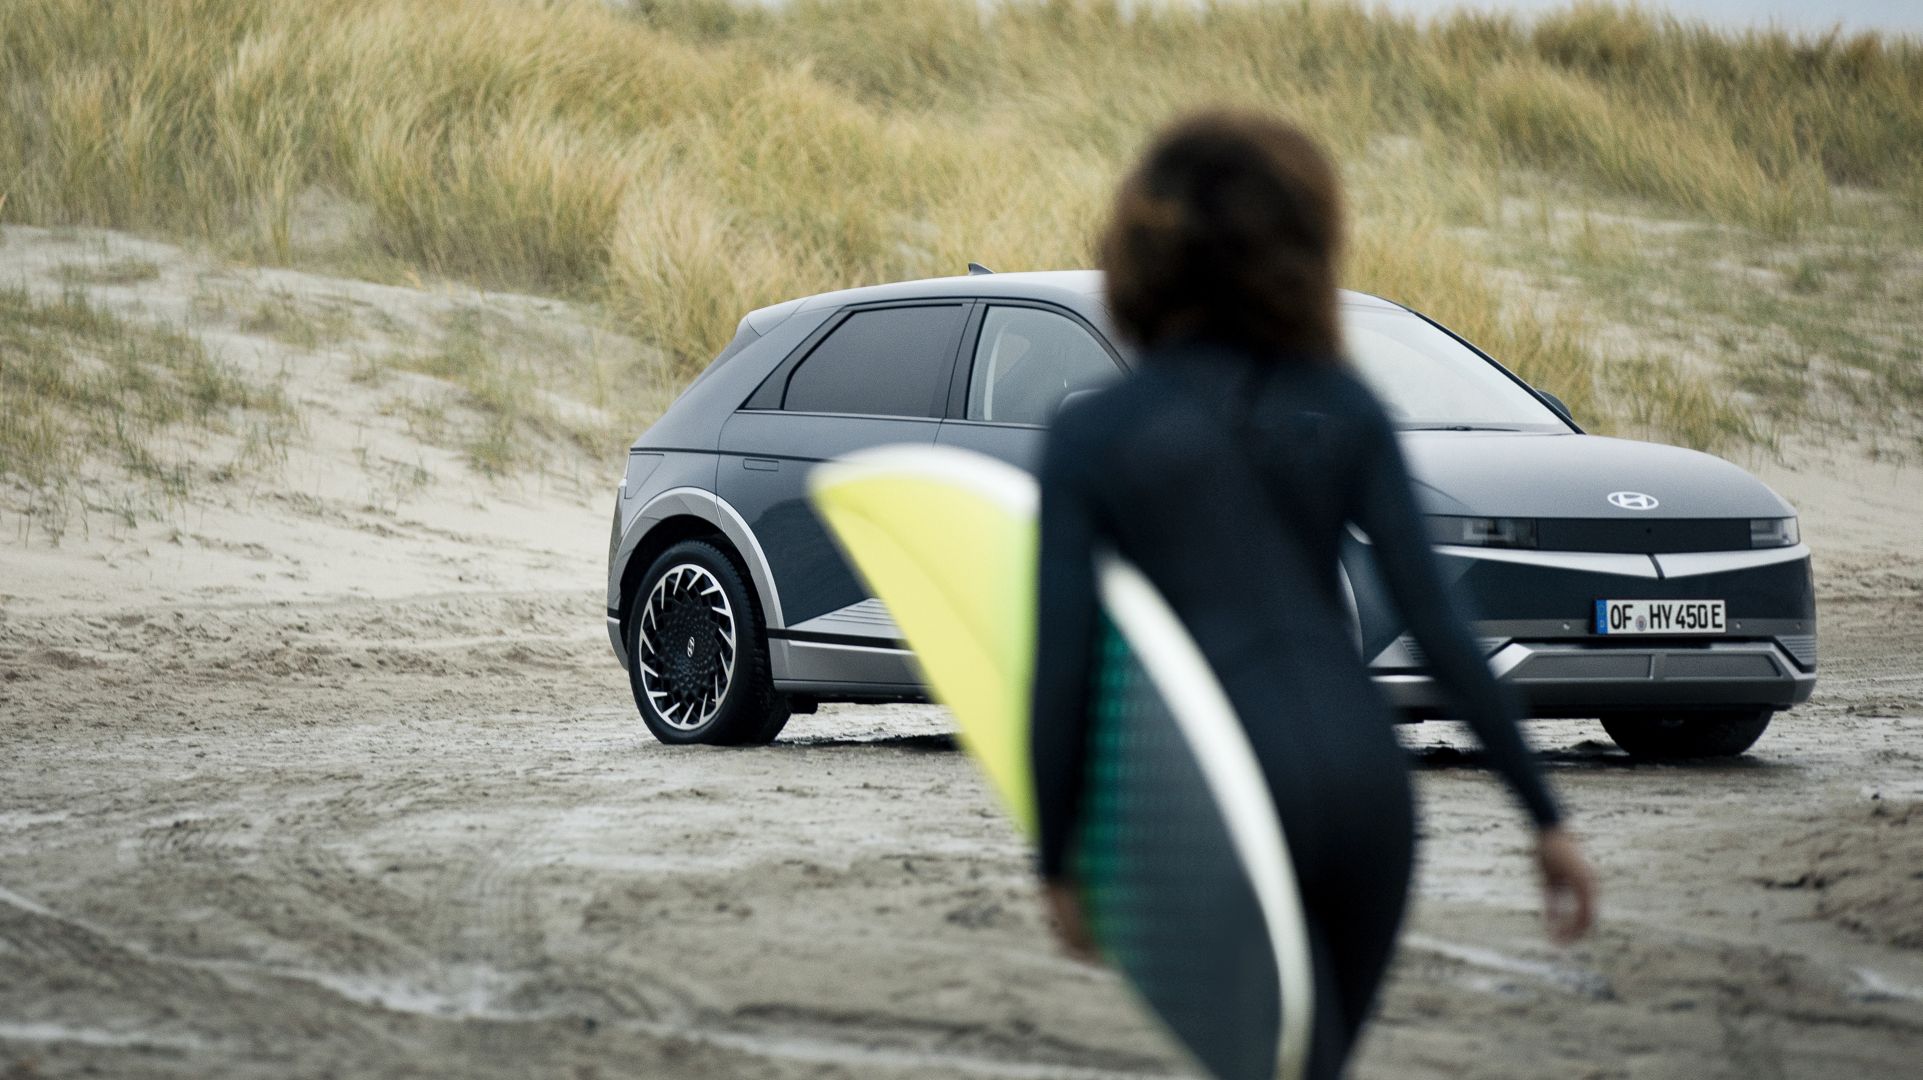 A surfer approaching her Hyundai IONIQ 5 electric vehicle parked on the beach.